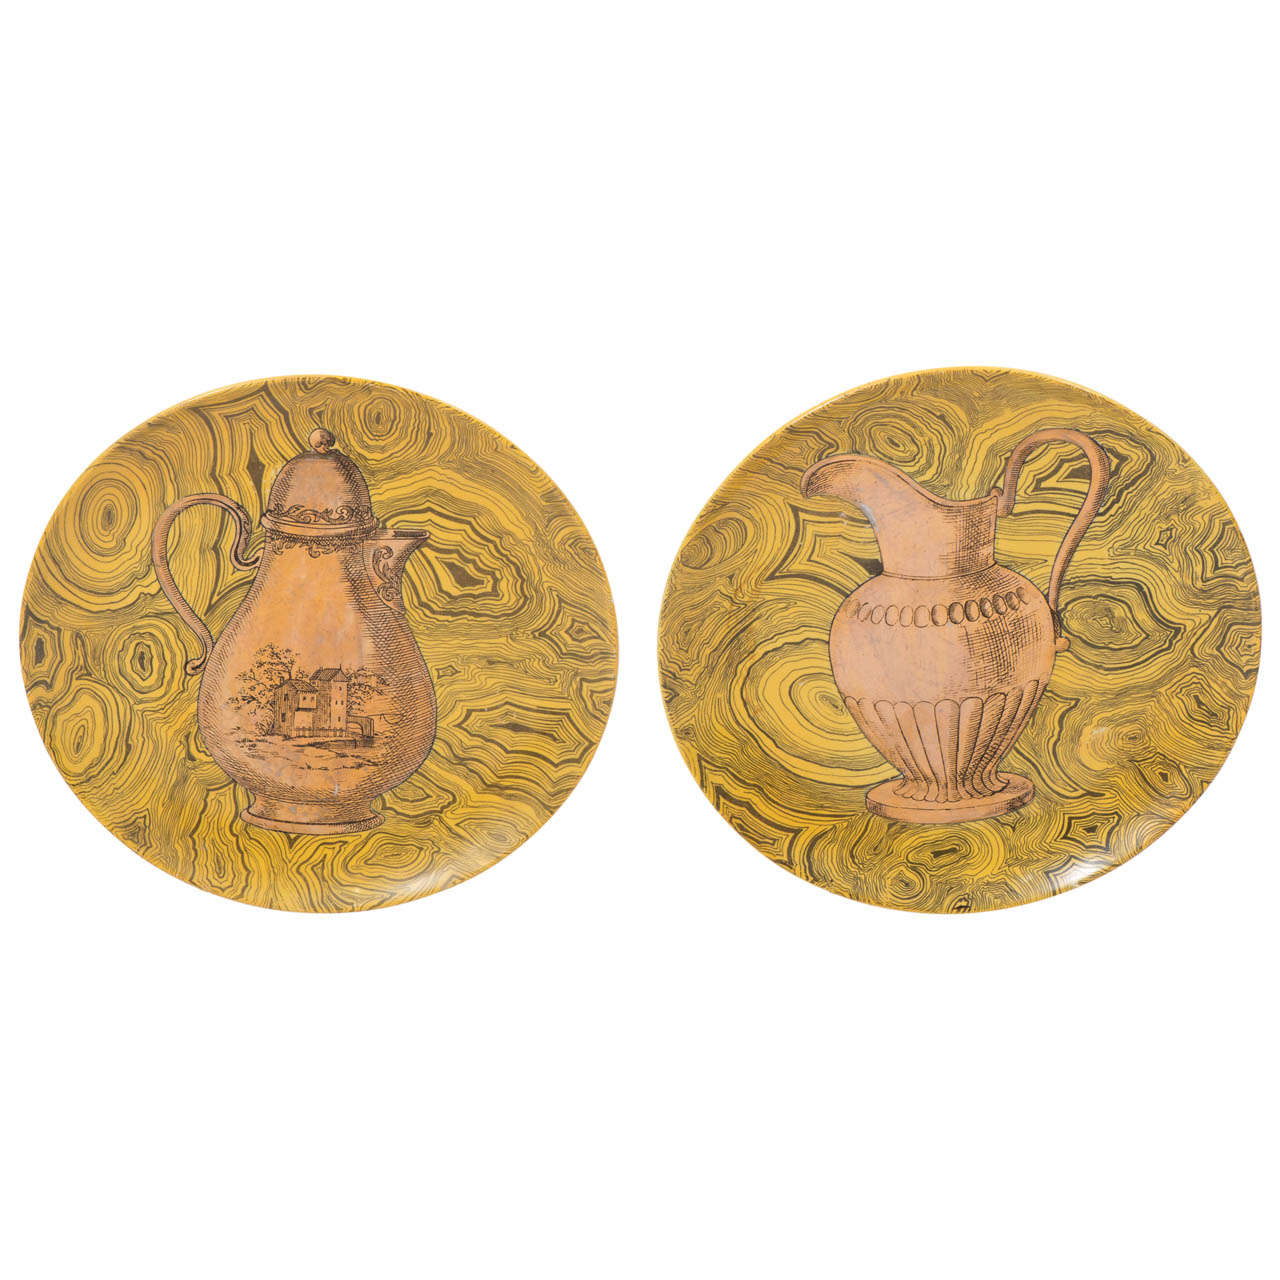 A Pair of Porcelain "Stroviglie" Plates by Piero Fornasetti